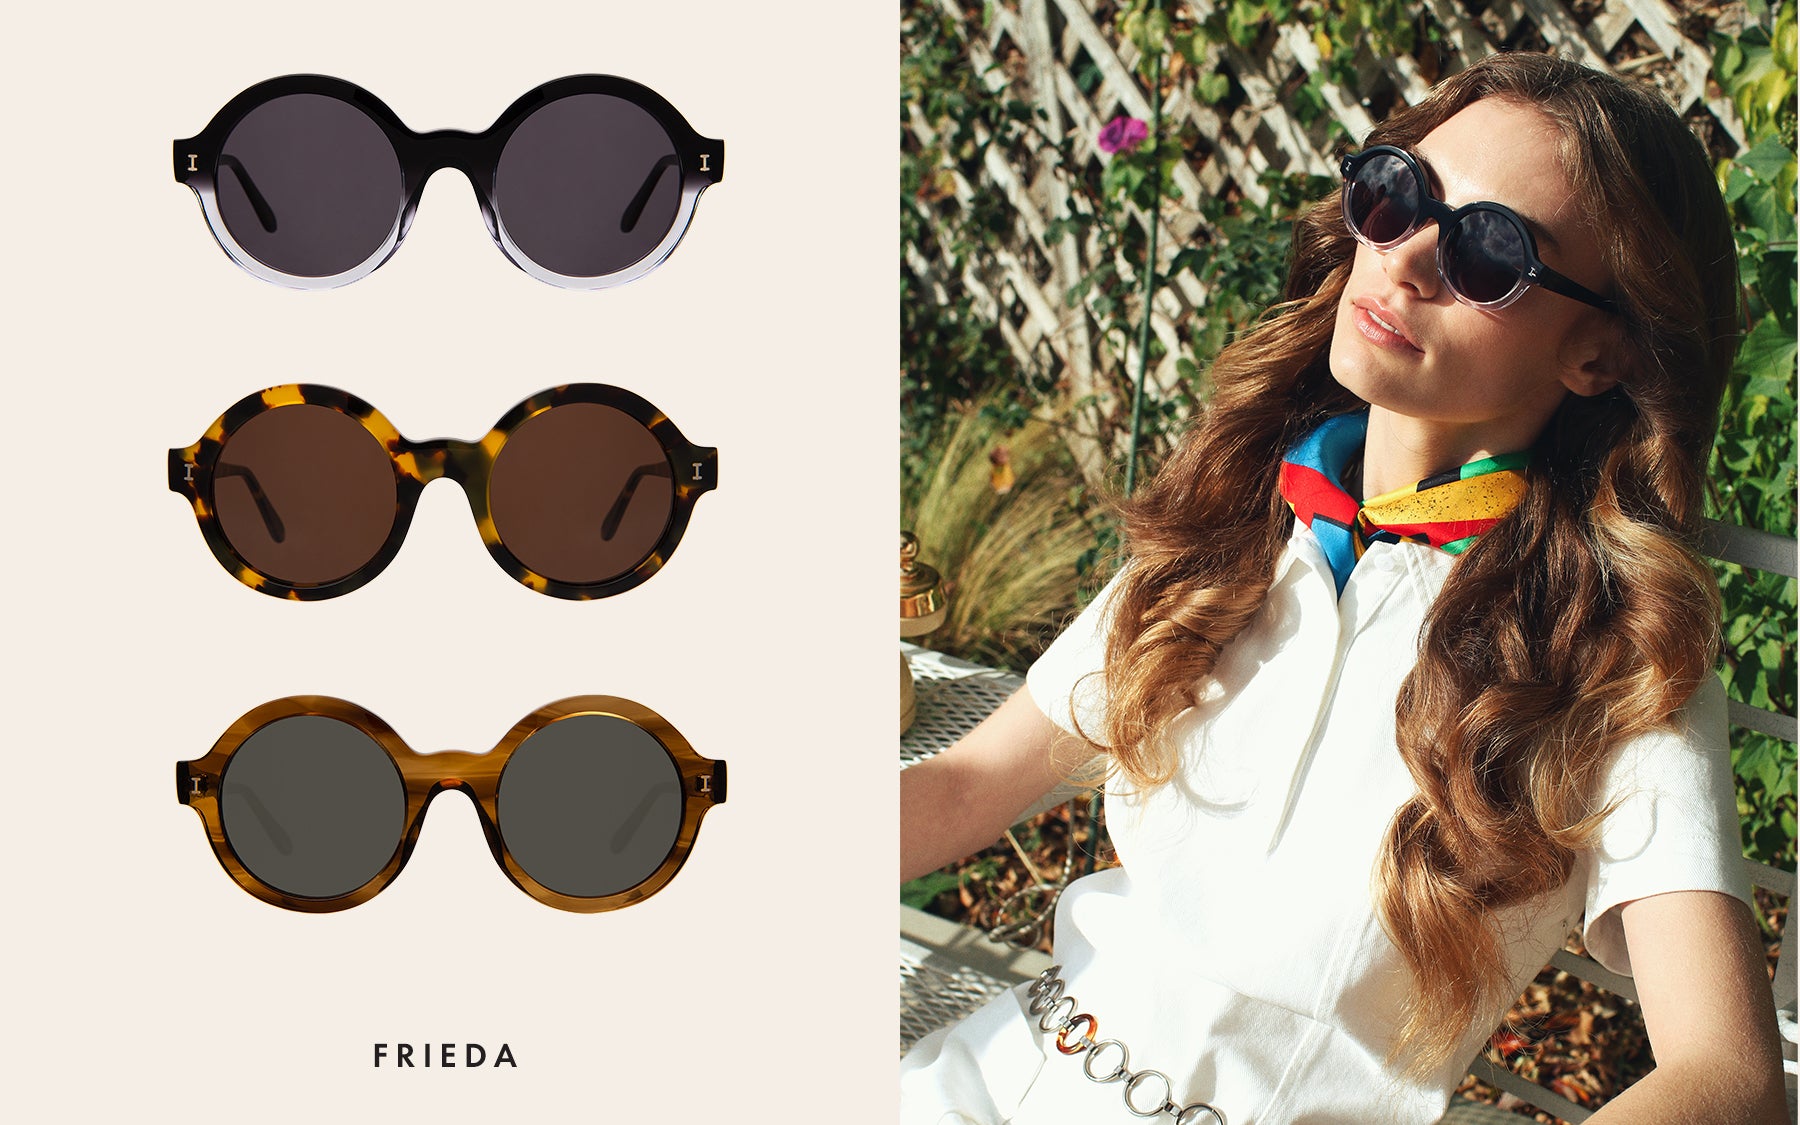 Frieda (10 year anniversary edition) shown in three colors alongside a brunette model wearing the Frieda in H/H Black/Clear